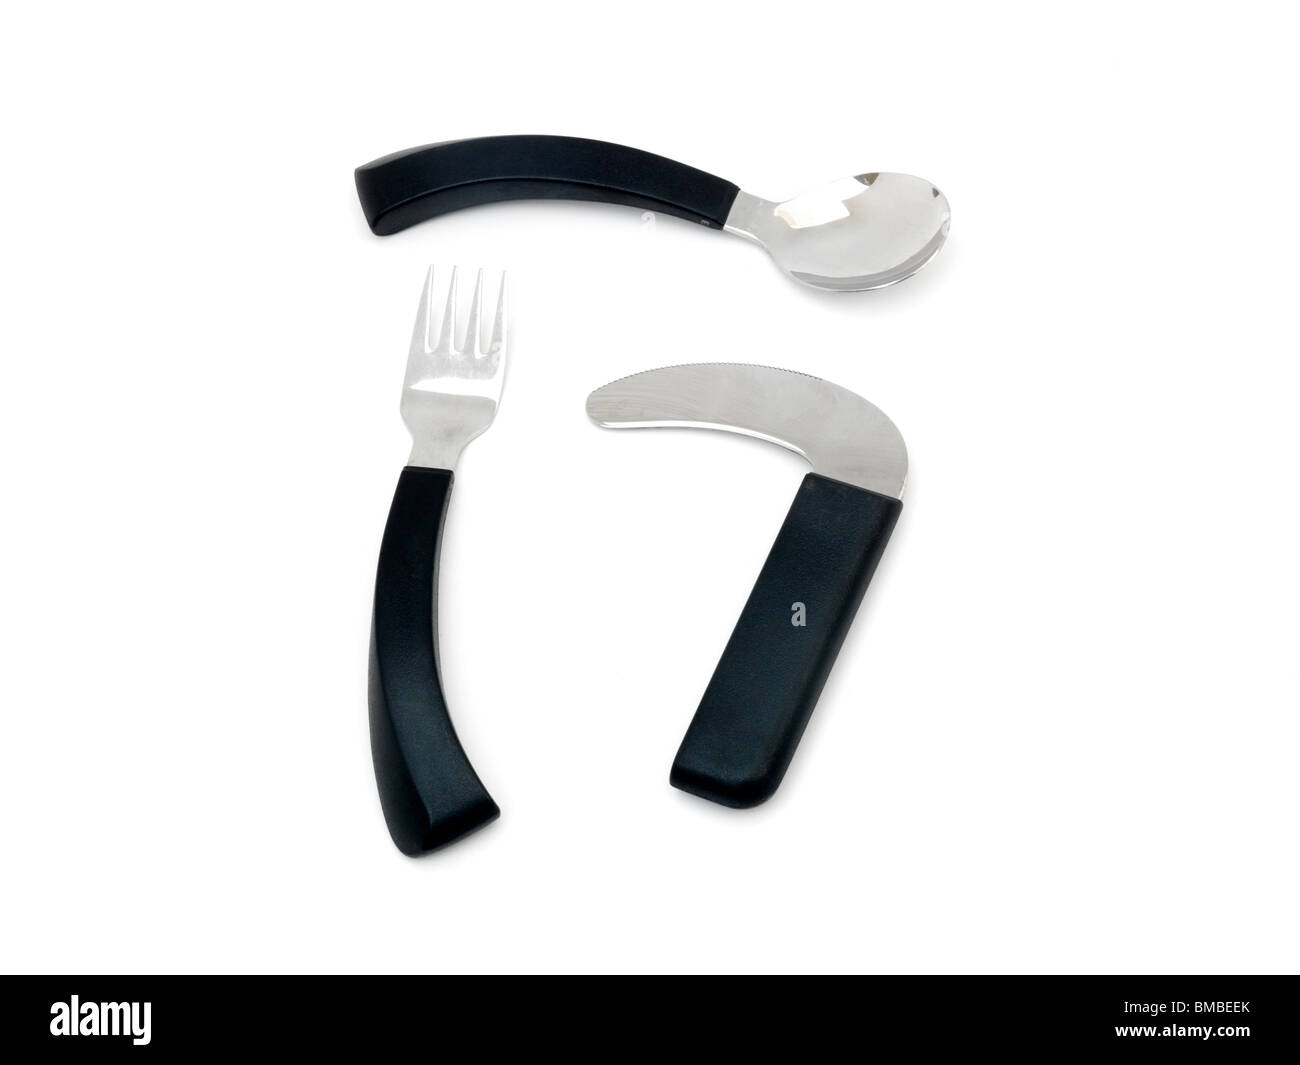 Amefa Angled Contoured Cutlery For People Who Have Restricted Wrist Or Finger Movement Stock Photo